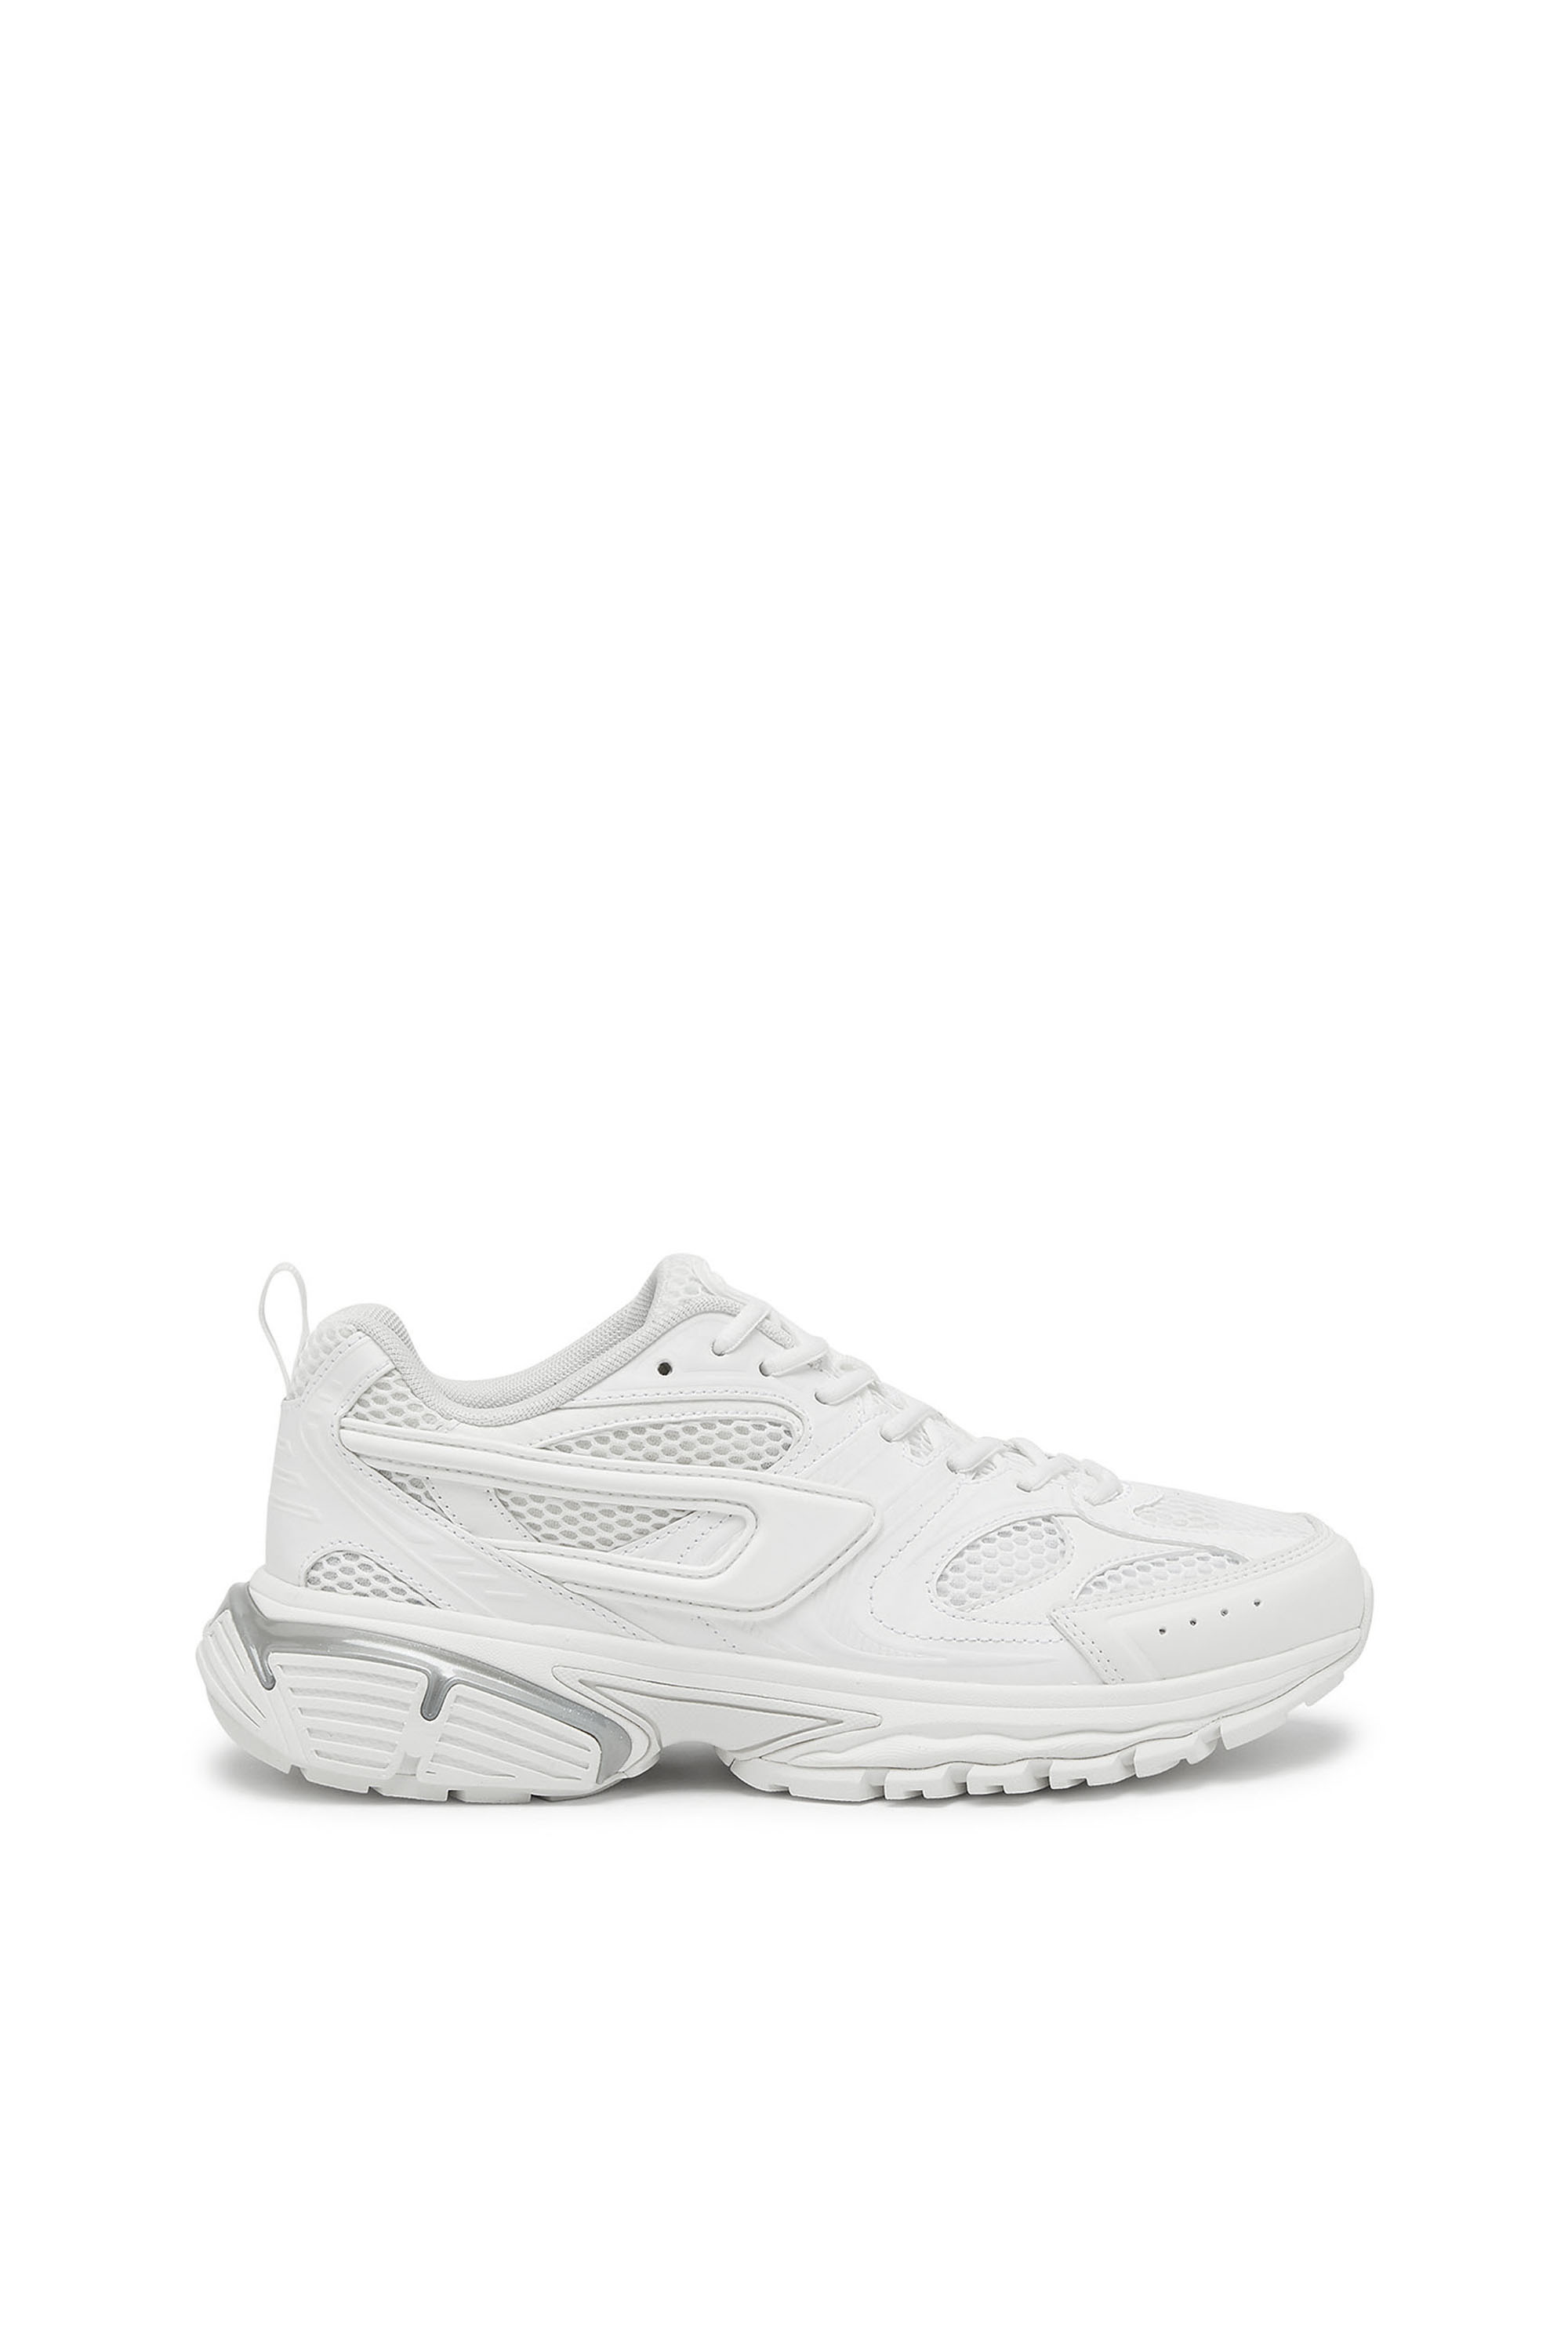 Diesel - S-Serendipity-Monochrome sneakers in mesh and PU - Sneakers - Woman - White